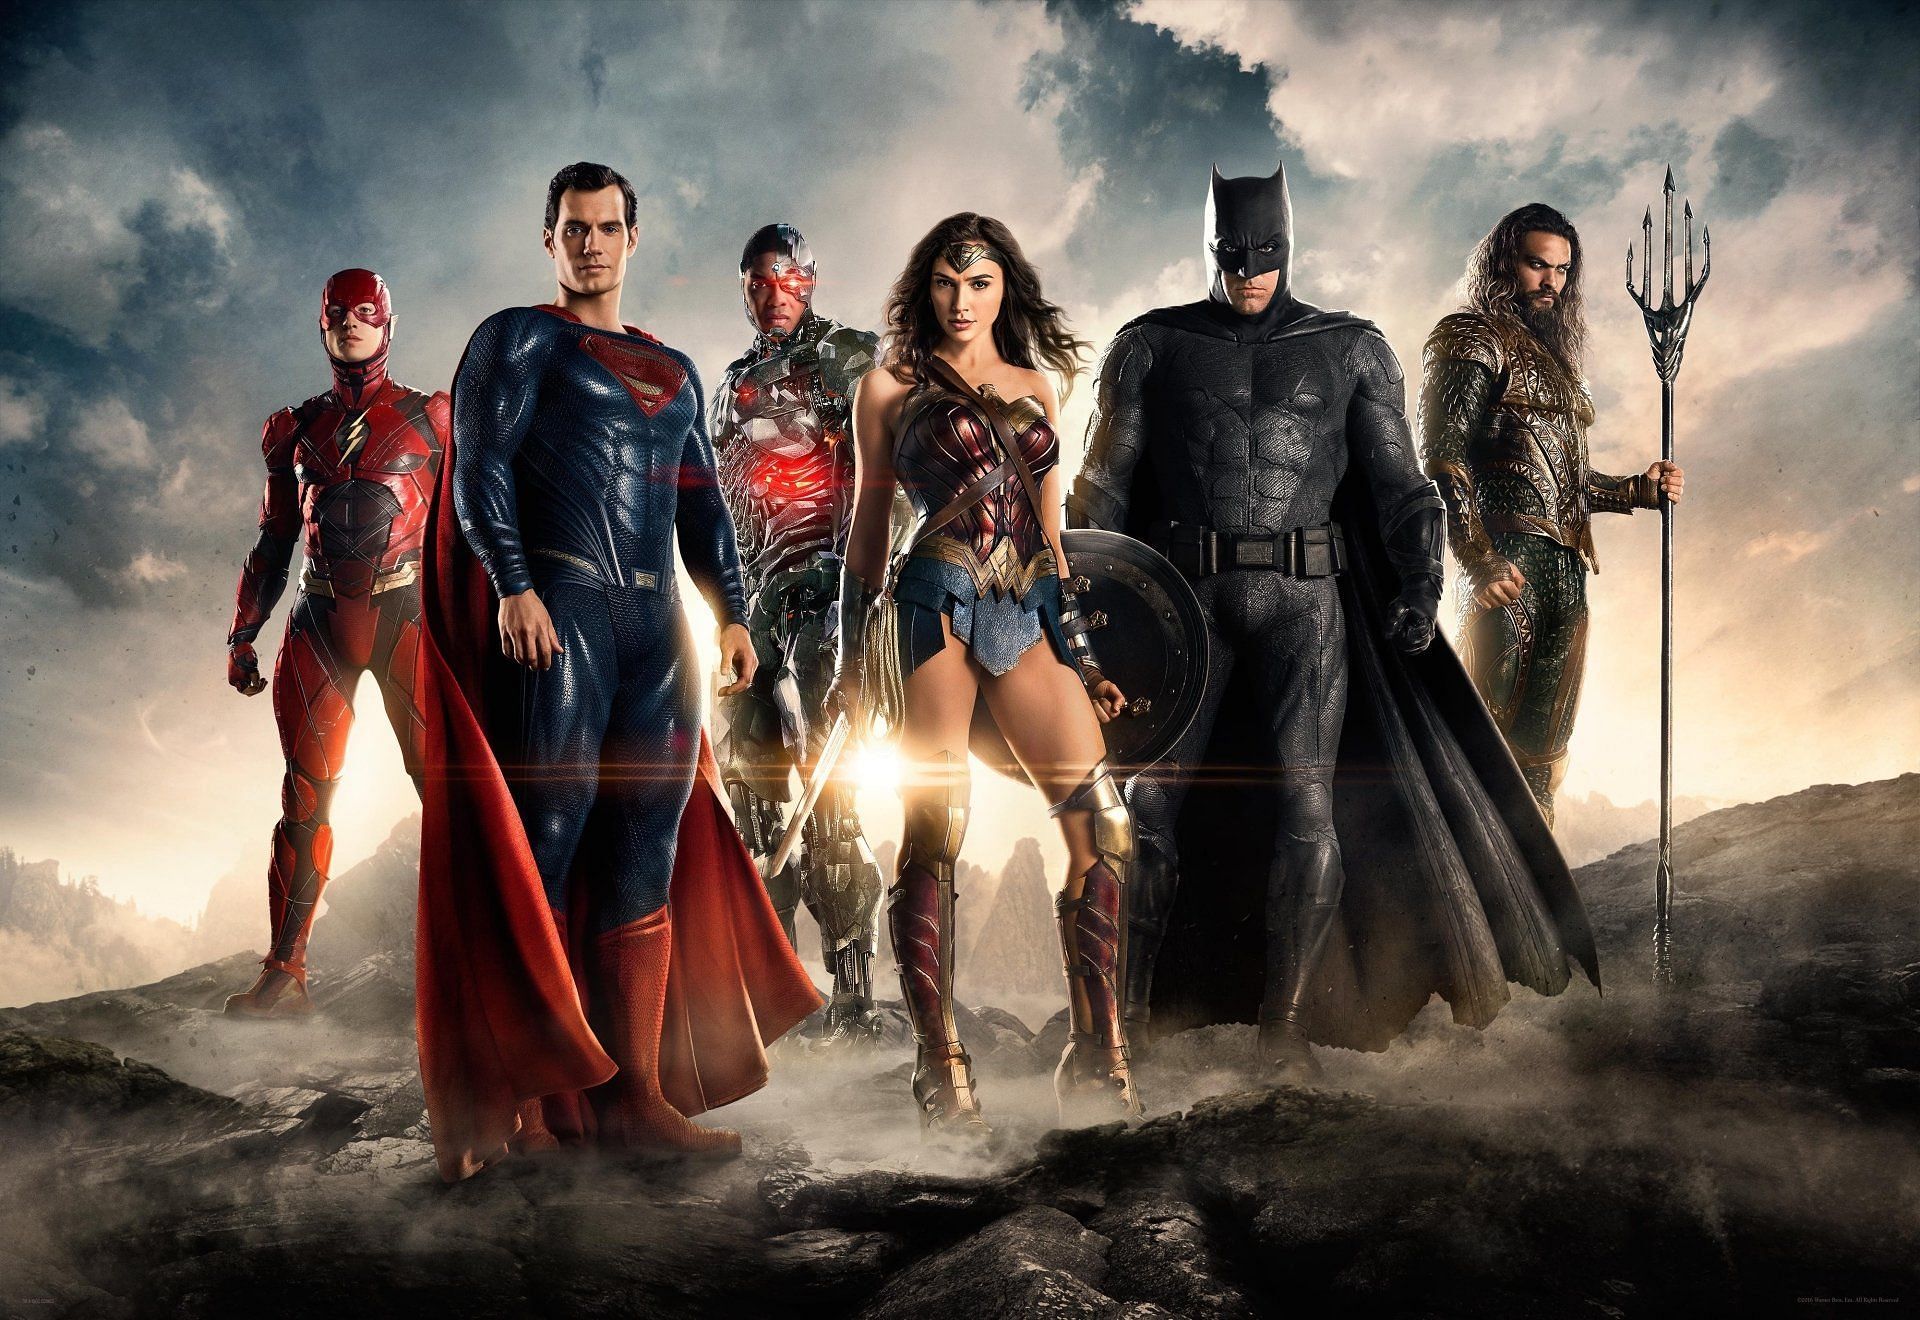 The sight of Batman, Wonder Woman, Superman, Aquaman, The Flash, and Cyborg assembling together filled cinema halls with an electrifying atmosphere. (Image Via DC)